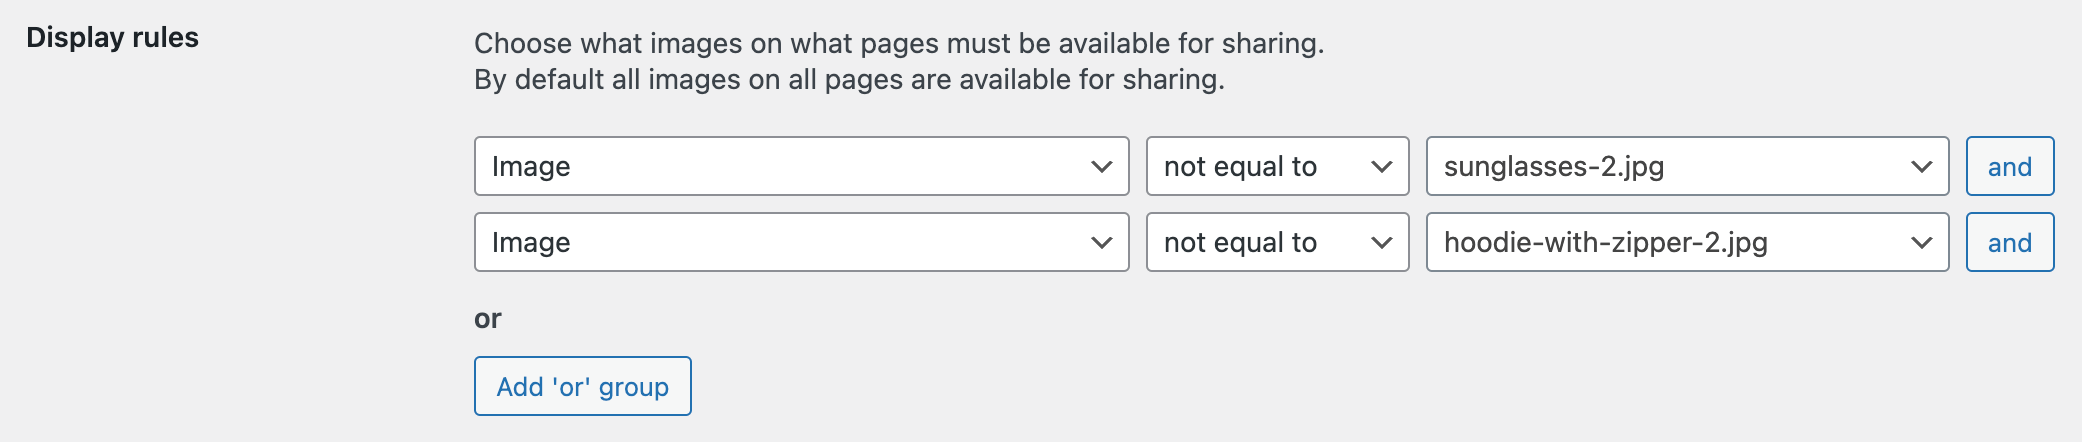 Exclude certain images from sharing